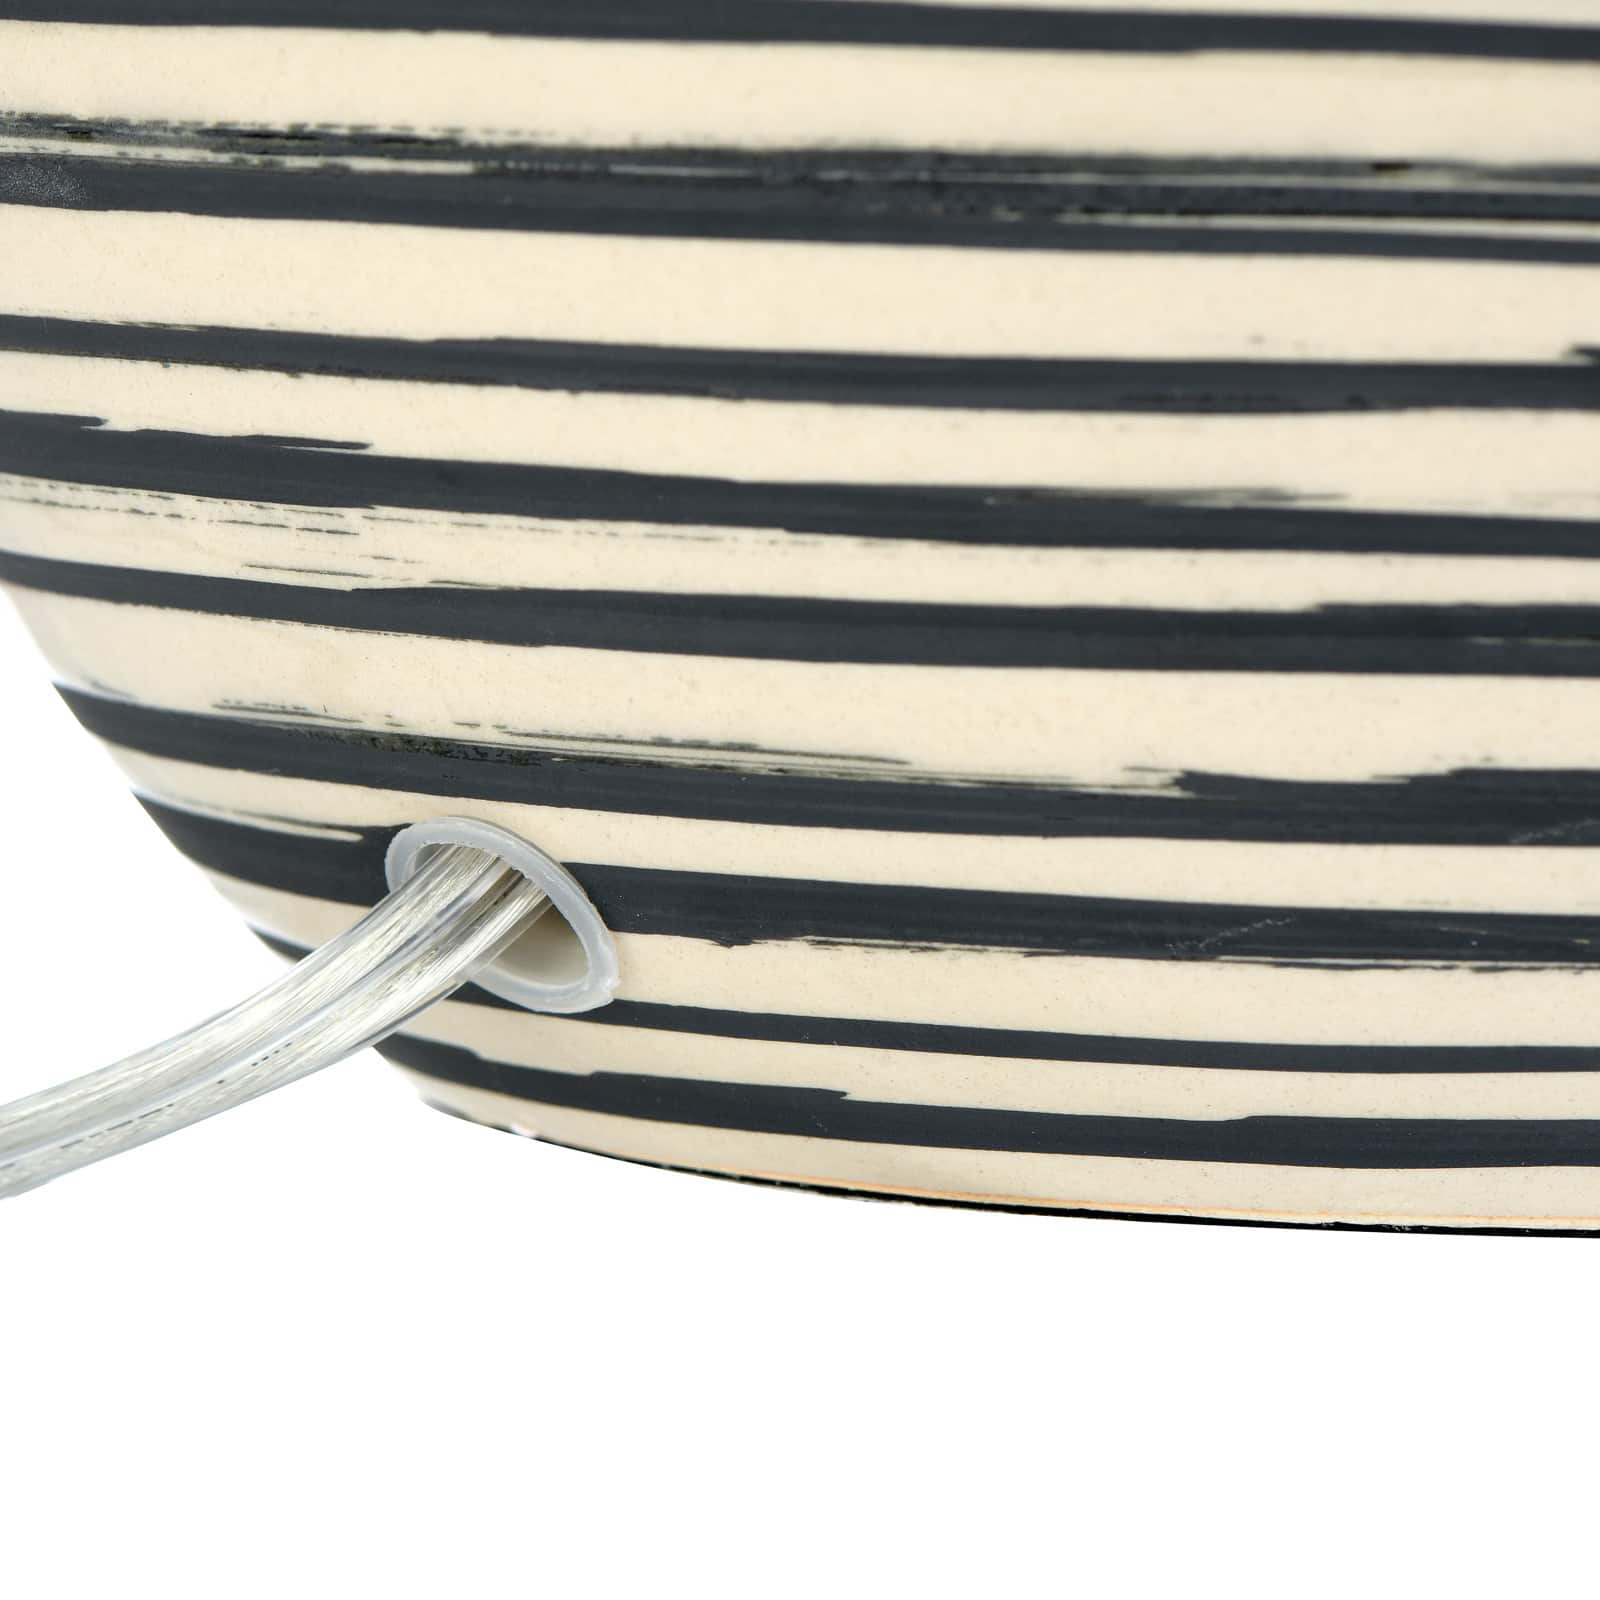 23&#x22; Ceramic Textured Striped Table Lamp